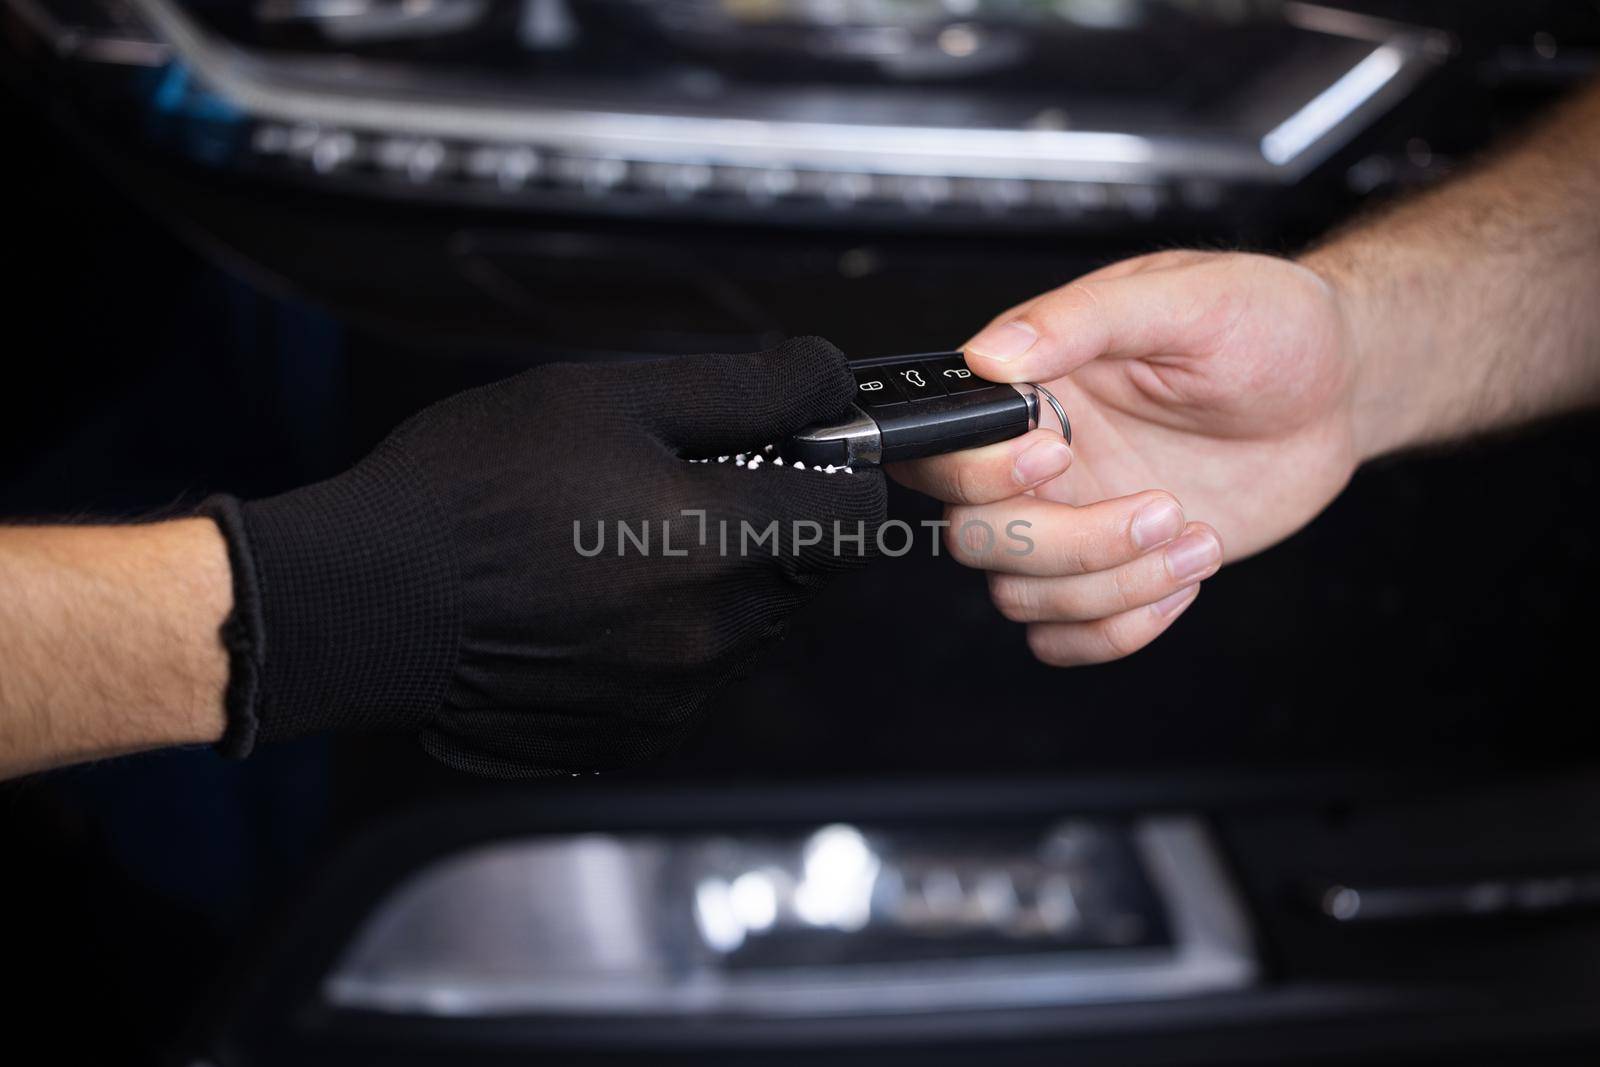 Car repair. Man owner of the auto gives the keys to the car repairman. Vehicle breaks down. Close up shot of hands of male client giving car key to mechanic in auto repair shop